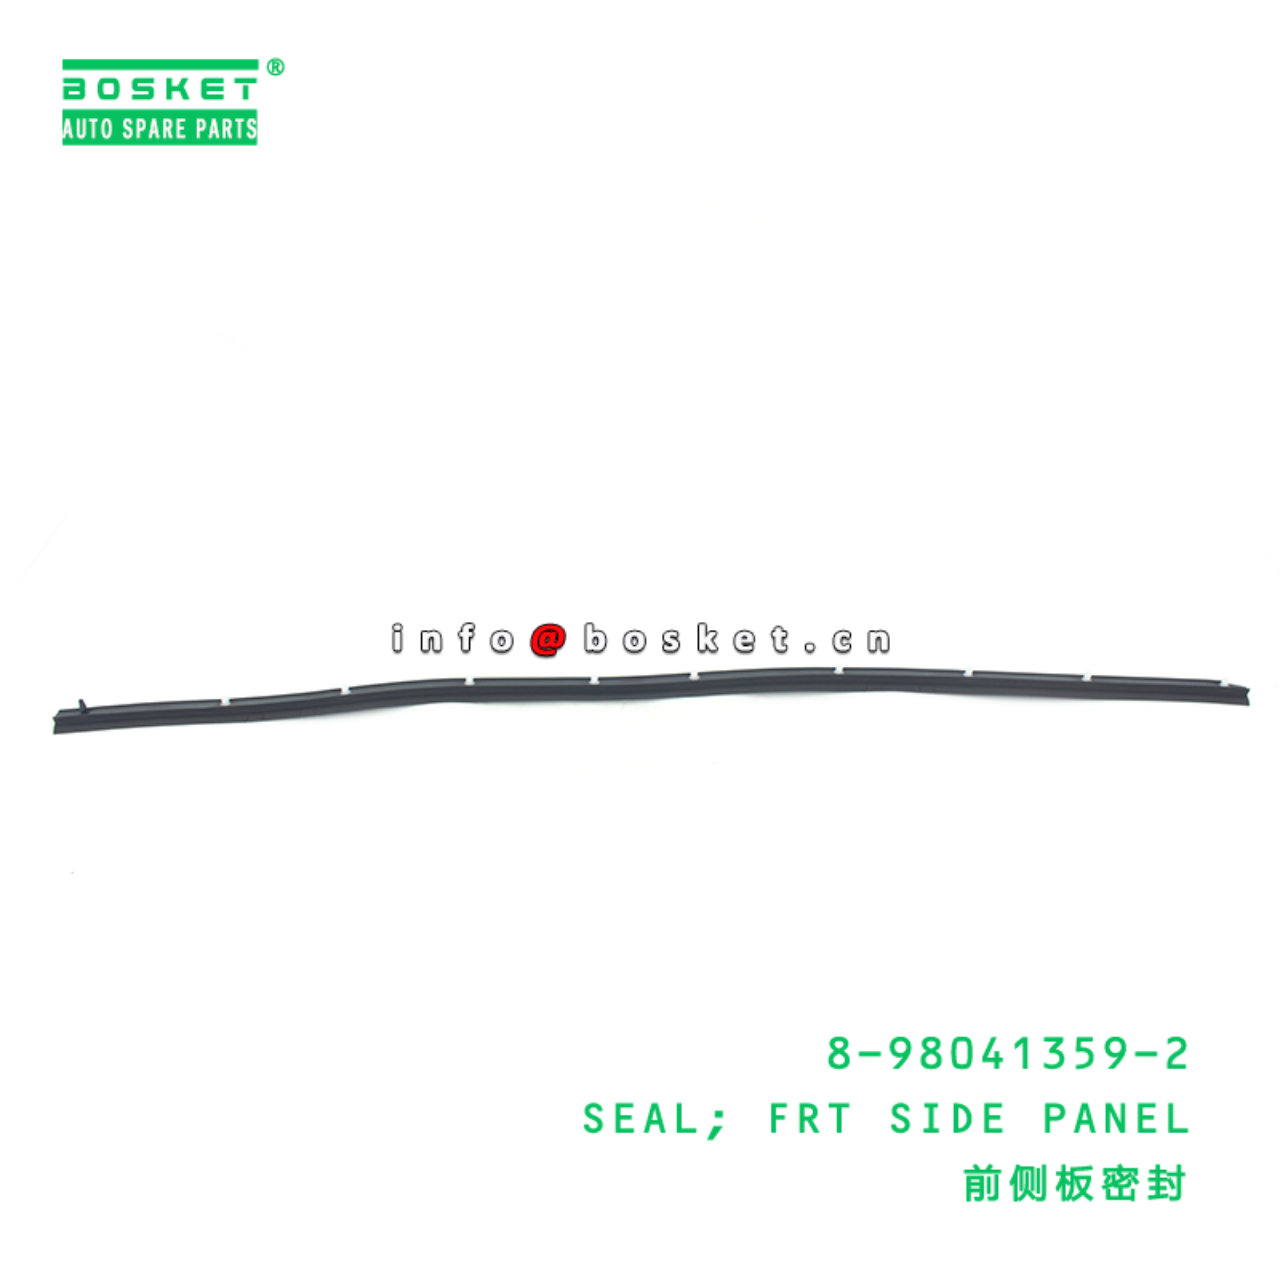 8-98041359-2 Front Side Panel Seal 8980413592 Suitable for ISUZU VC46